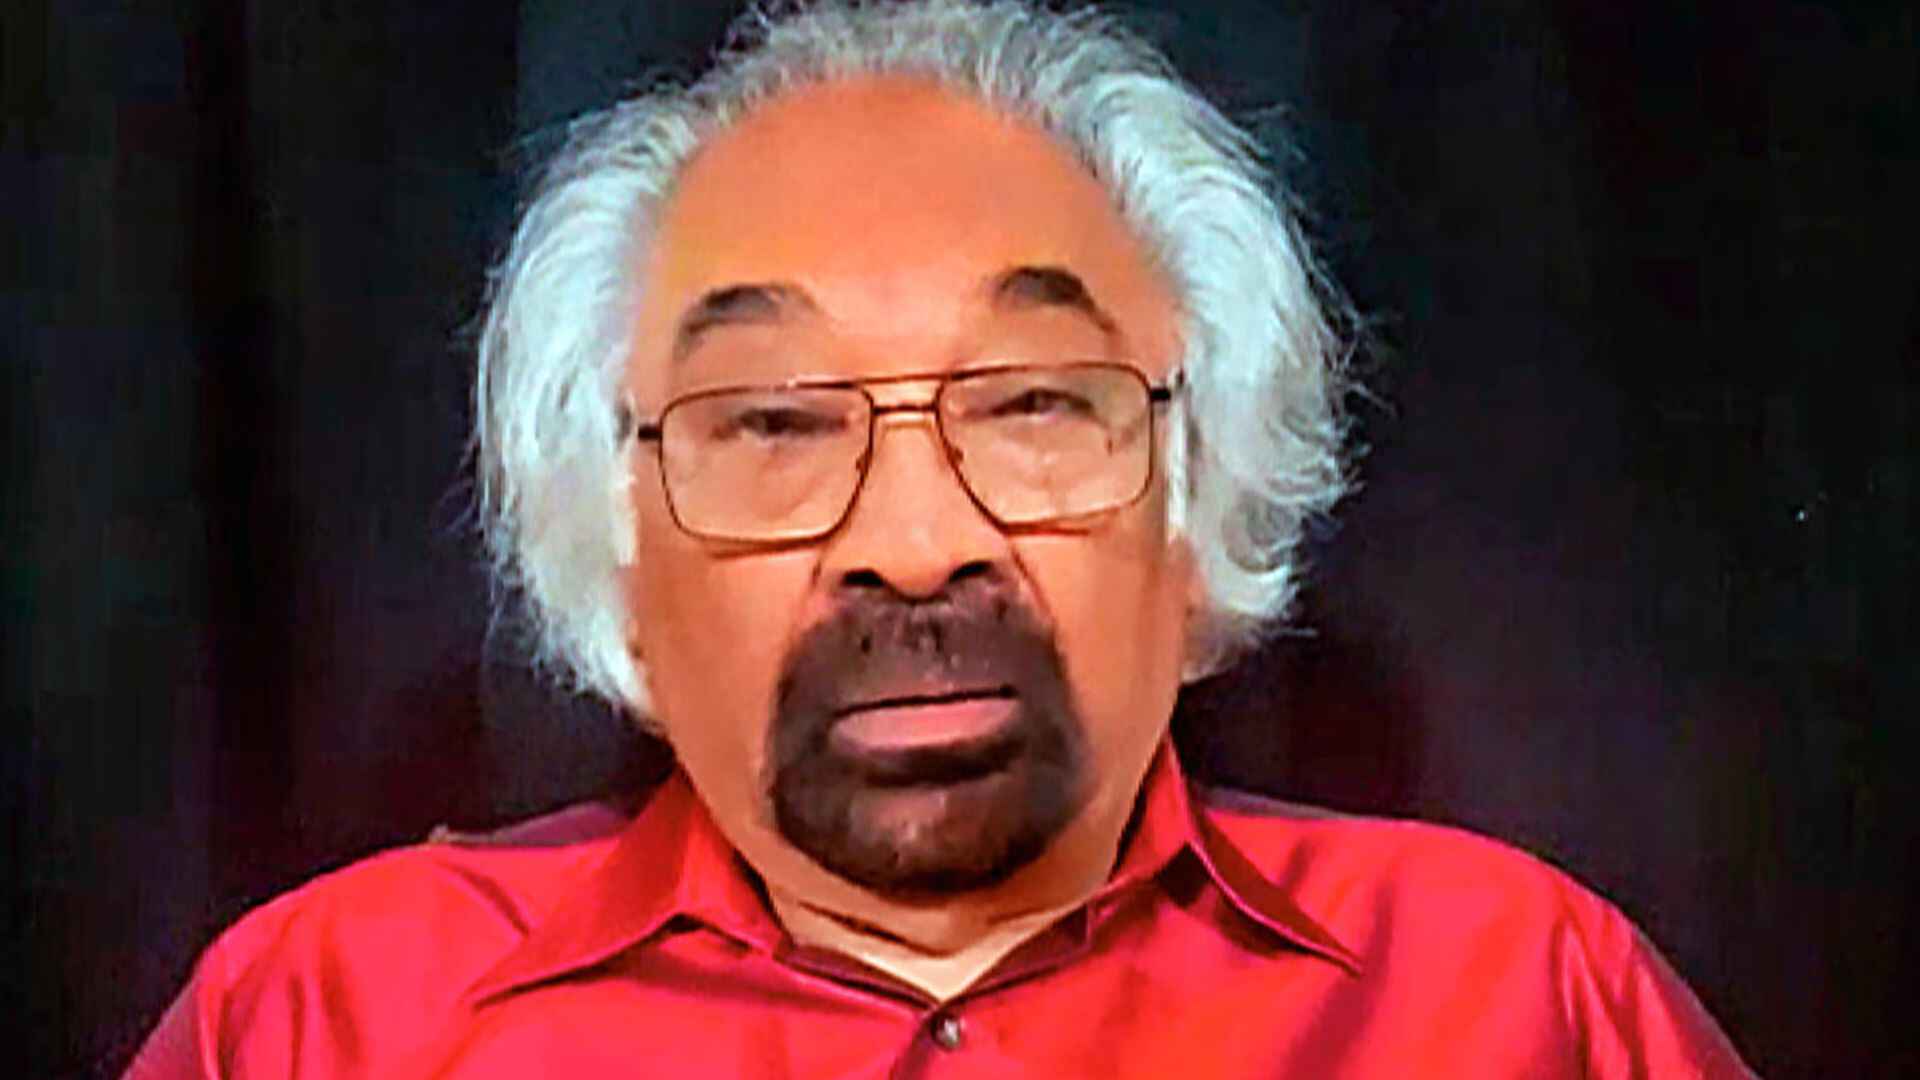 BJP Slams Congress Leader Sam Pitroda Over His Alleged Objectionable Comments On Indians